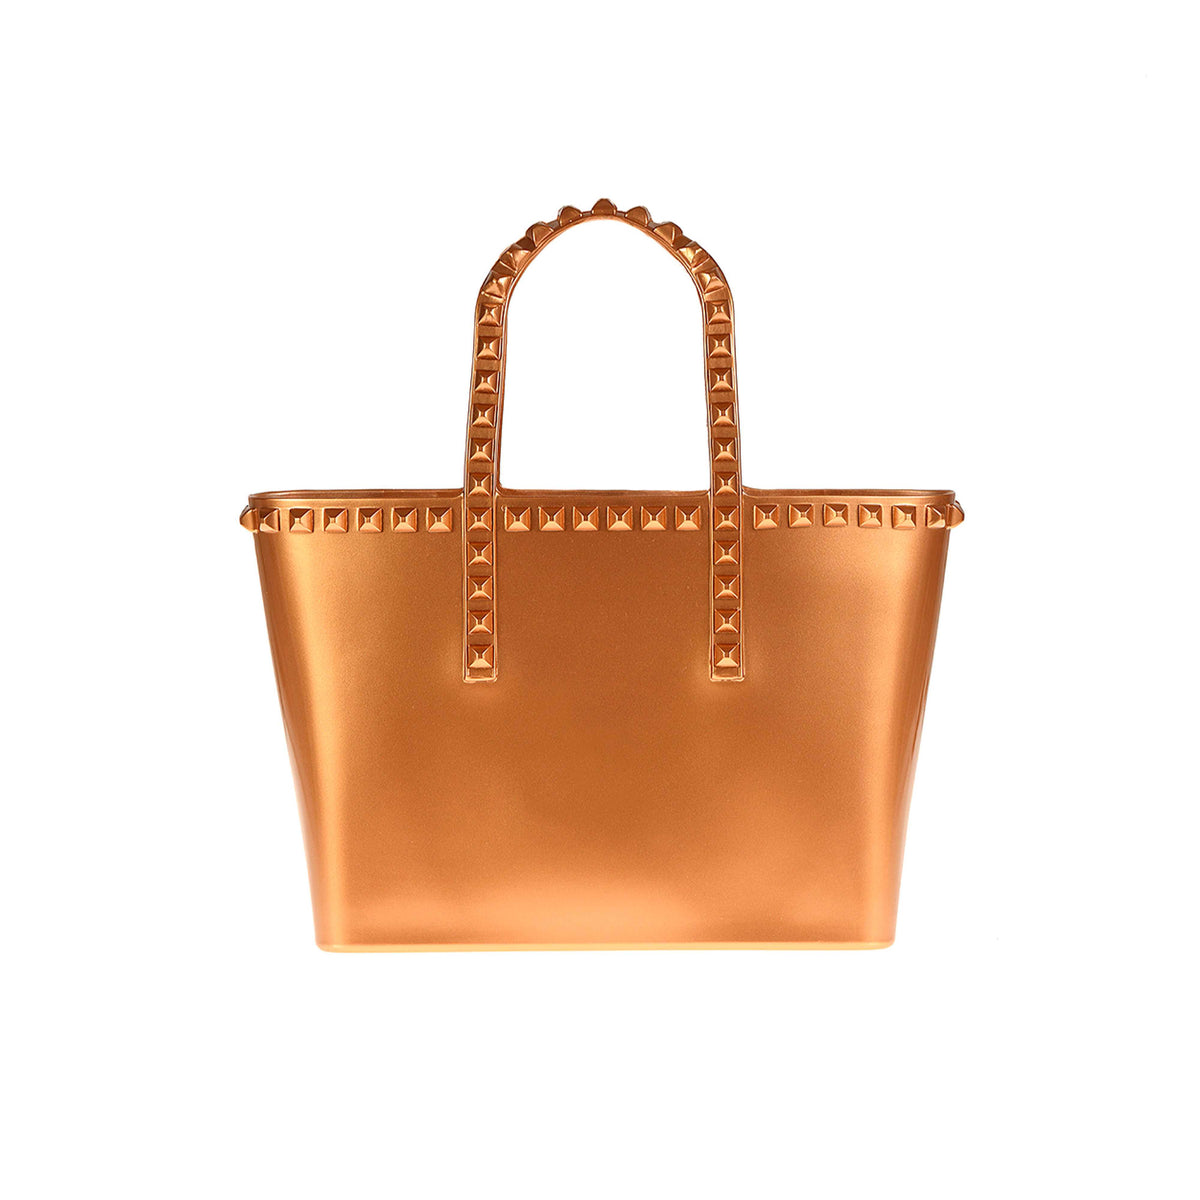 Rose gold mini jelly beach totes from Carmen Sol